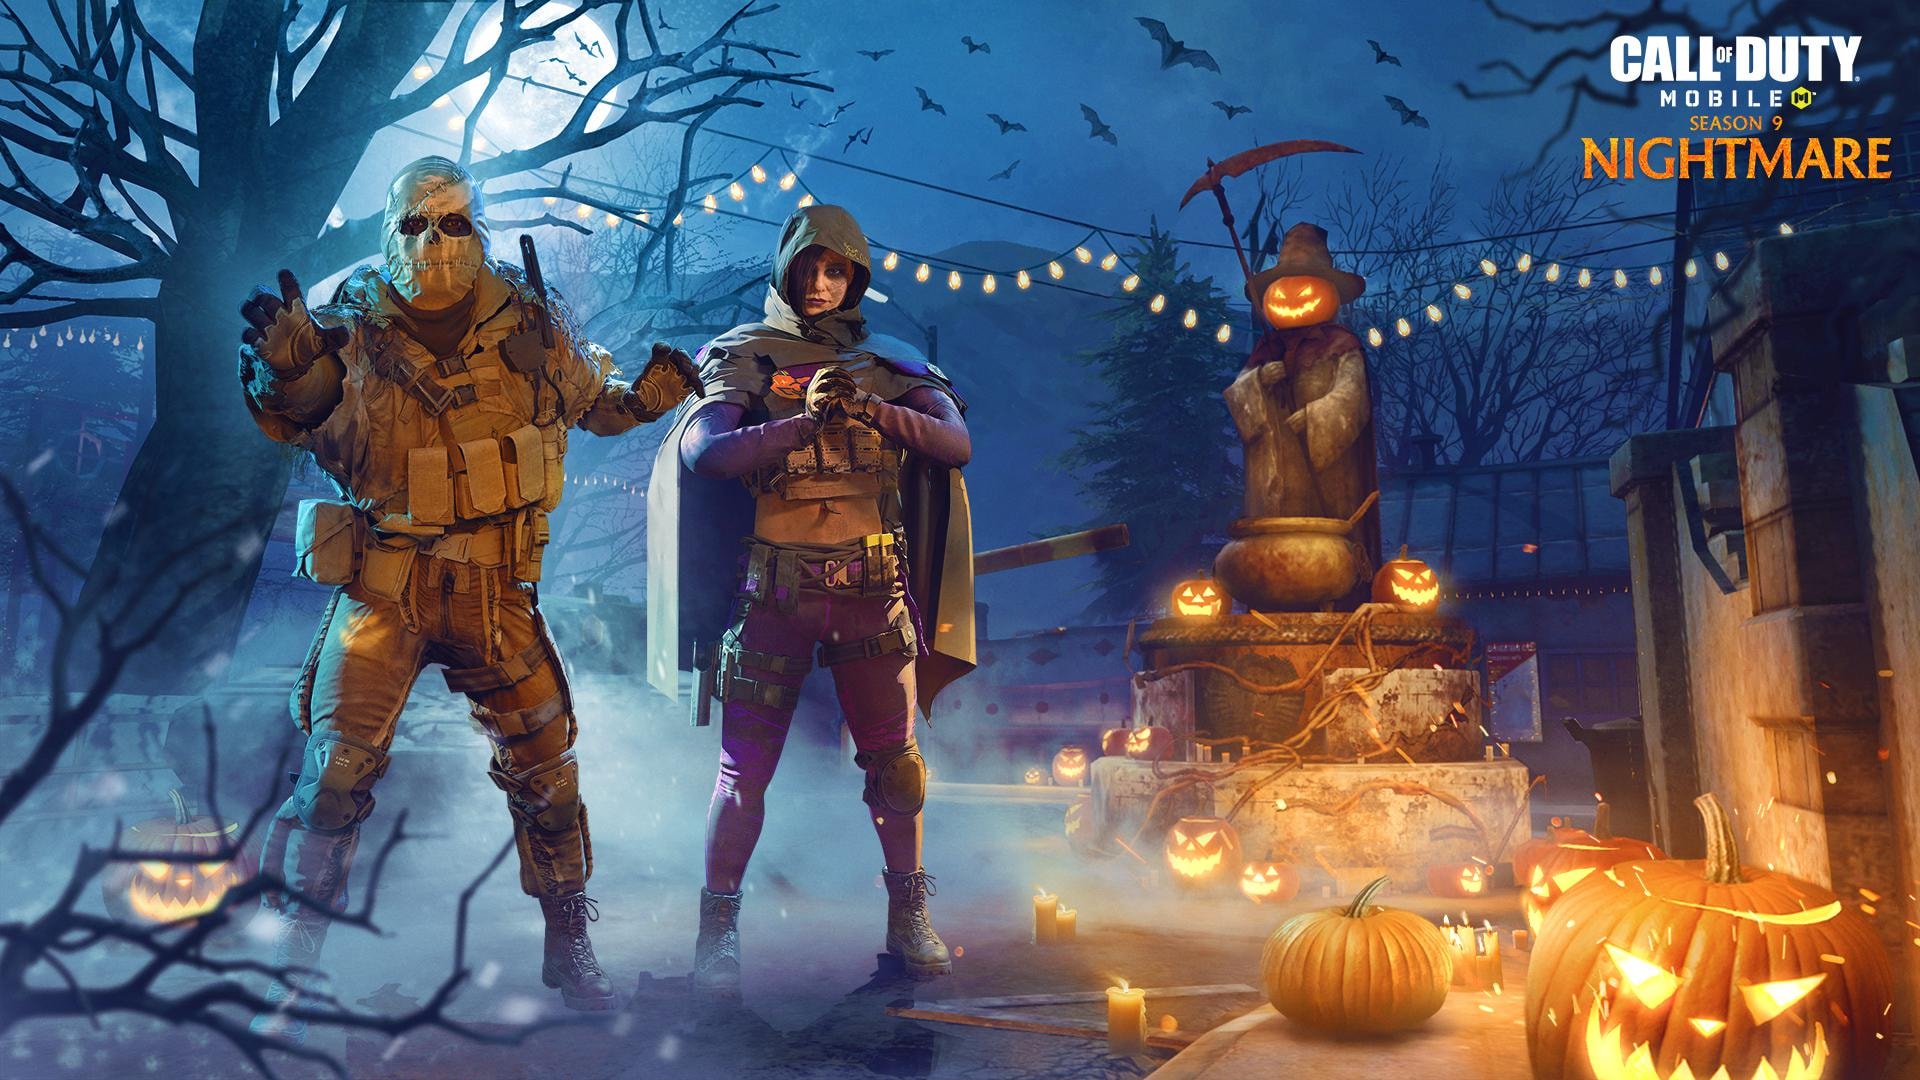 call-of-duty-mobile-season-9-is-live-patch-notes-detail-halloween-event-and-weapon-balancing